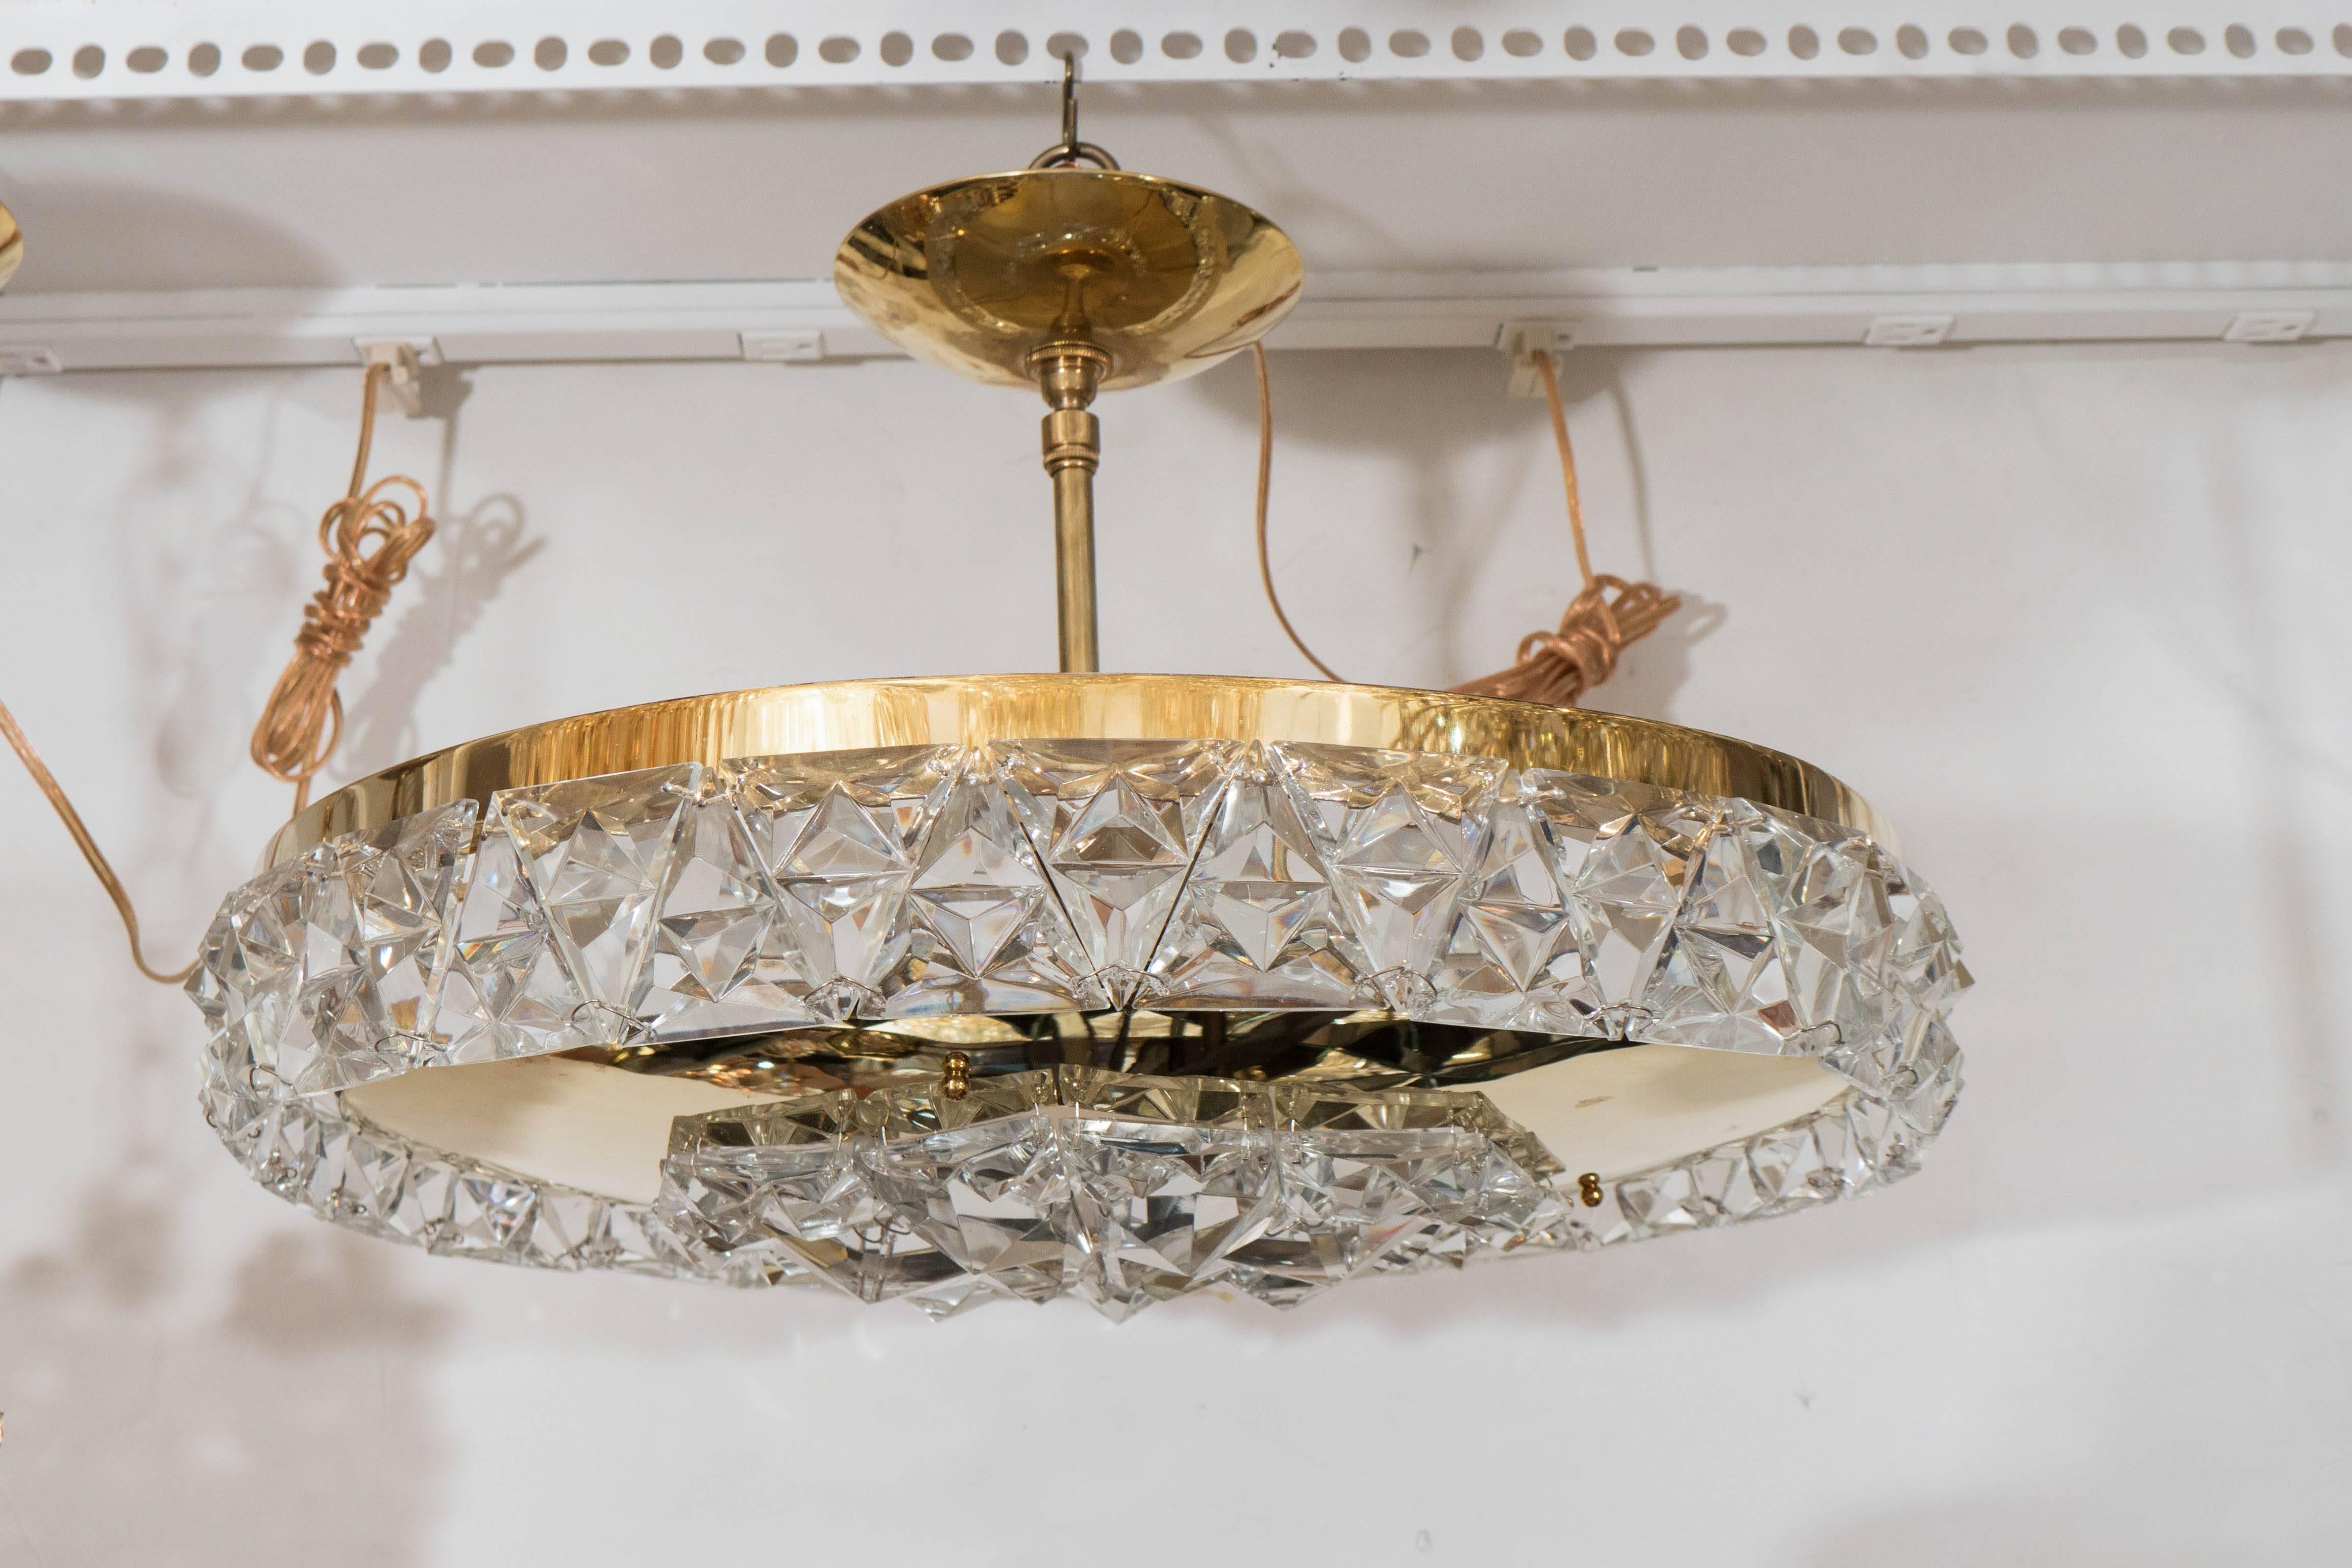 Round Polished Brass Ceiling Fixture with Facet Cut Crystal Surround 2